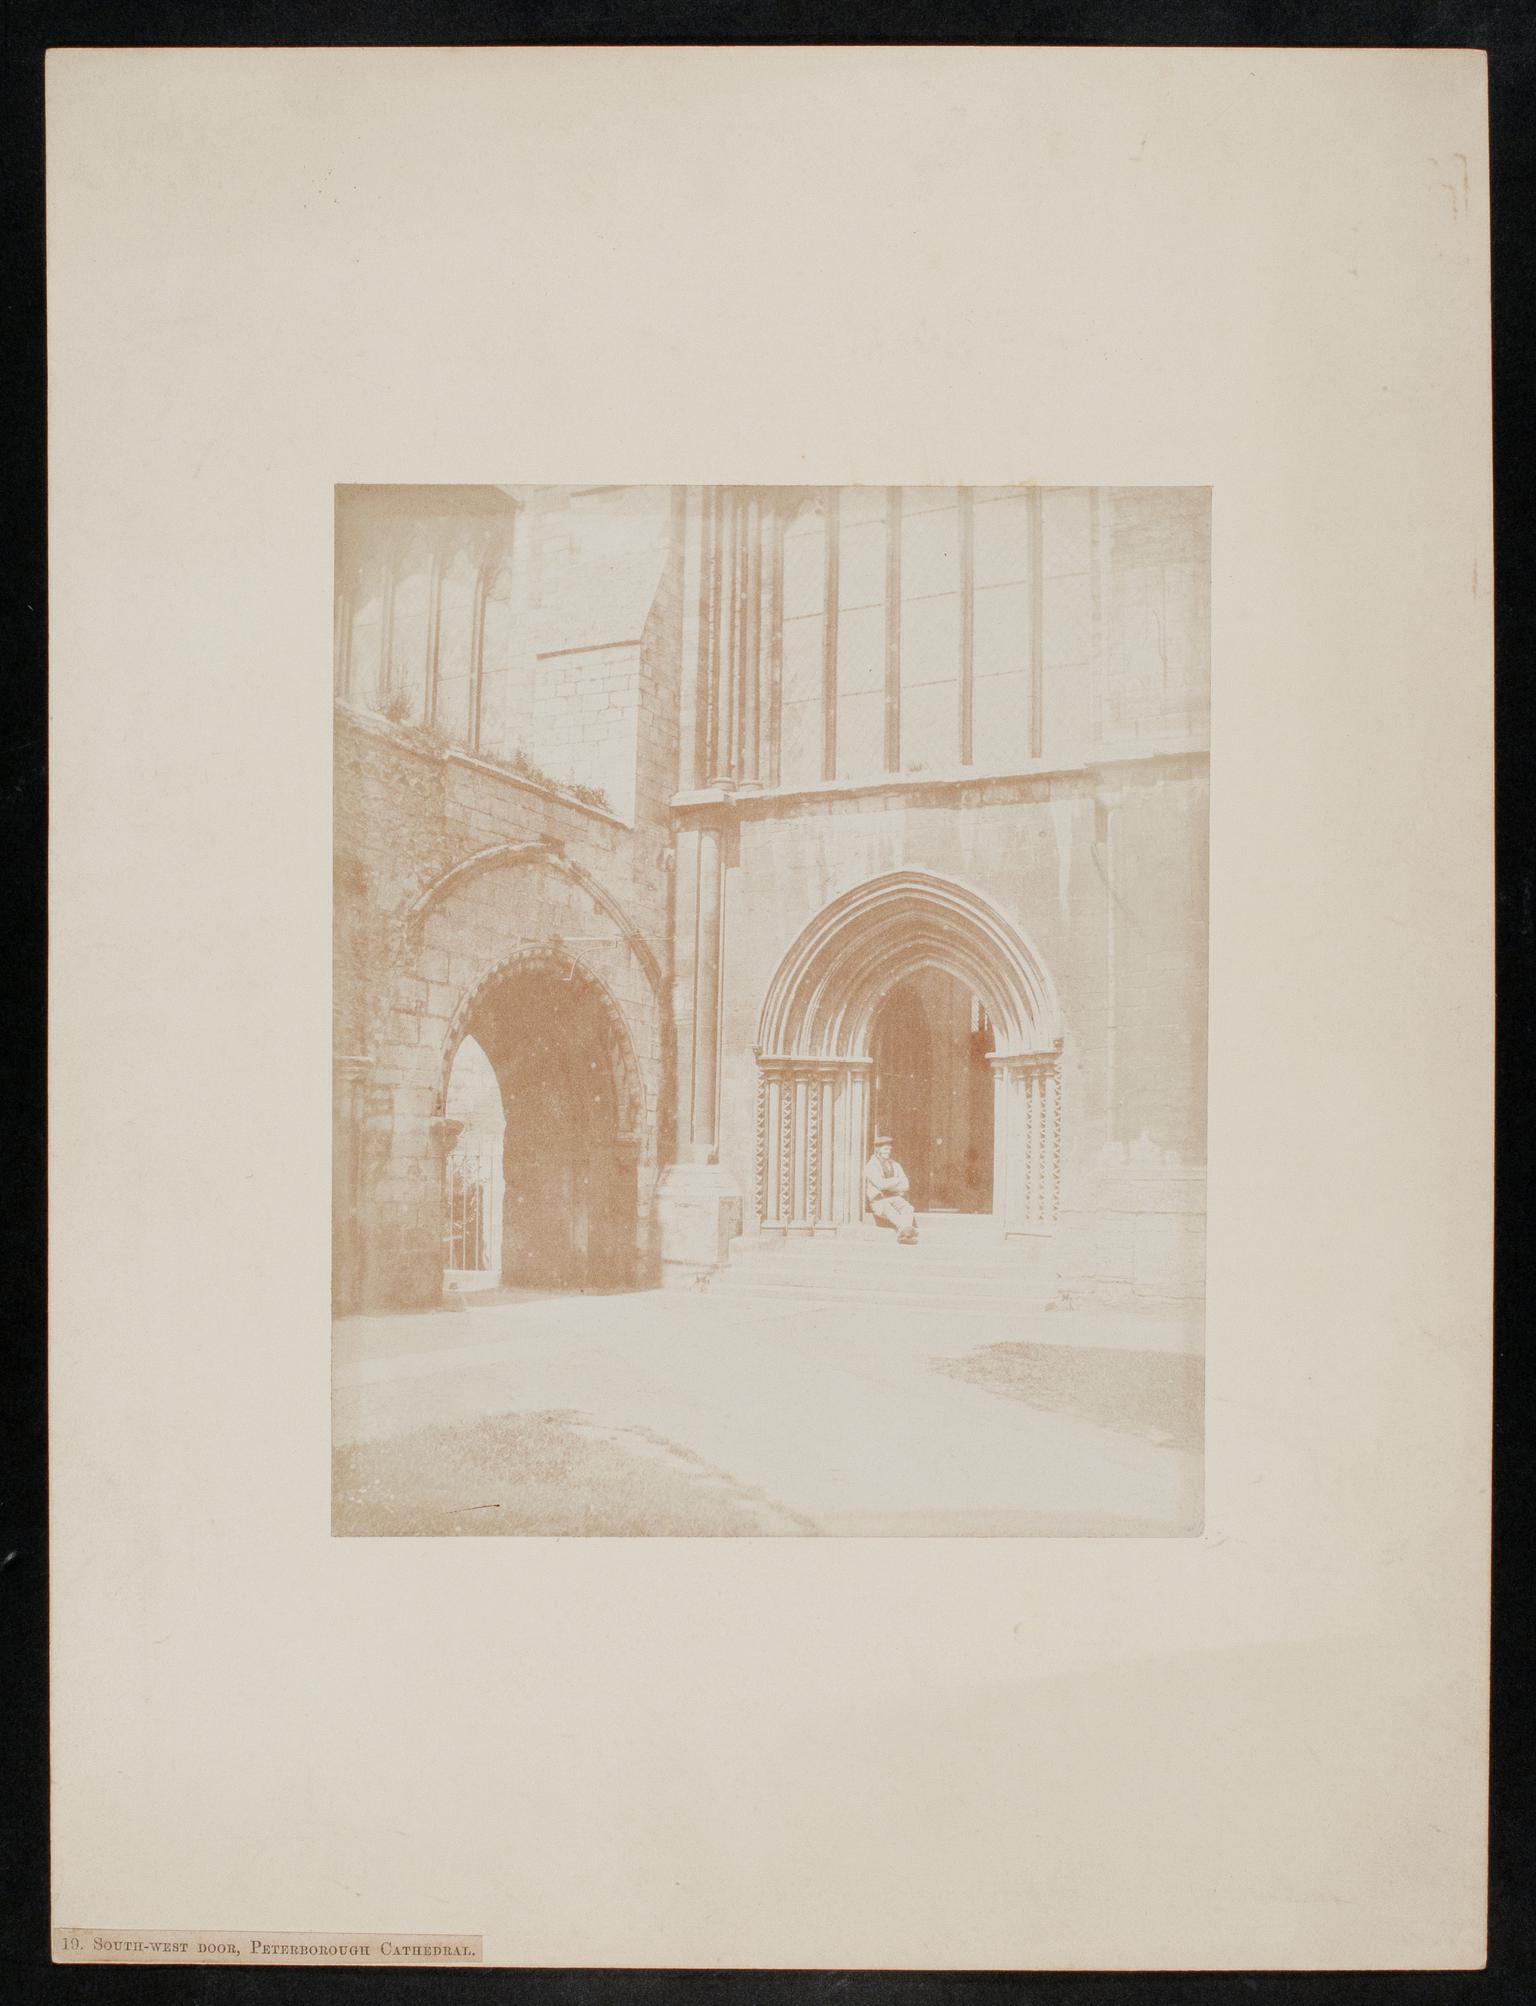 Peterborough Cathedral, photograph